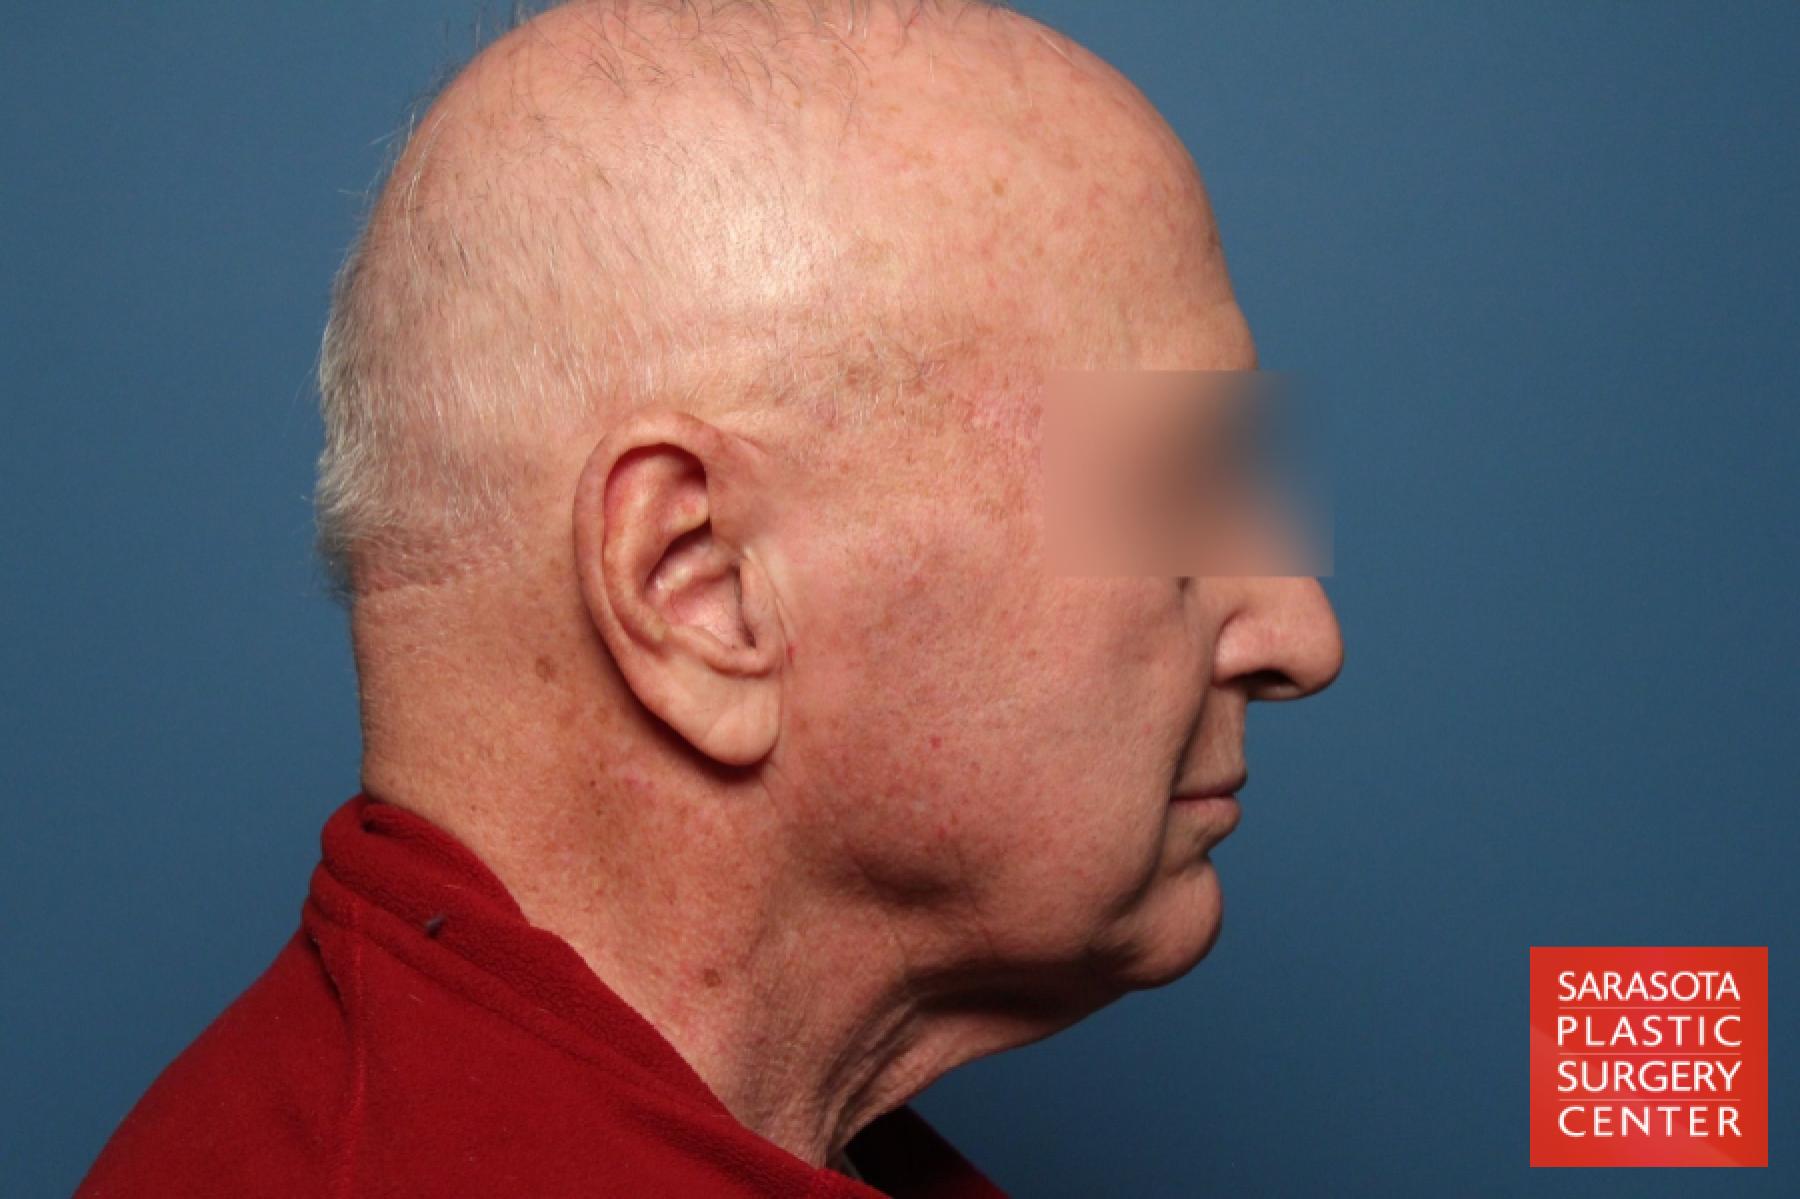 Neck Lift For Men: Patient 1 - Before and After 3